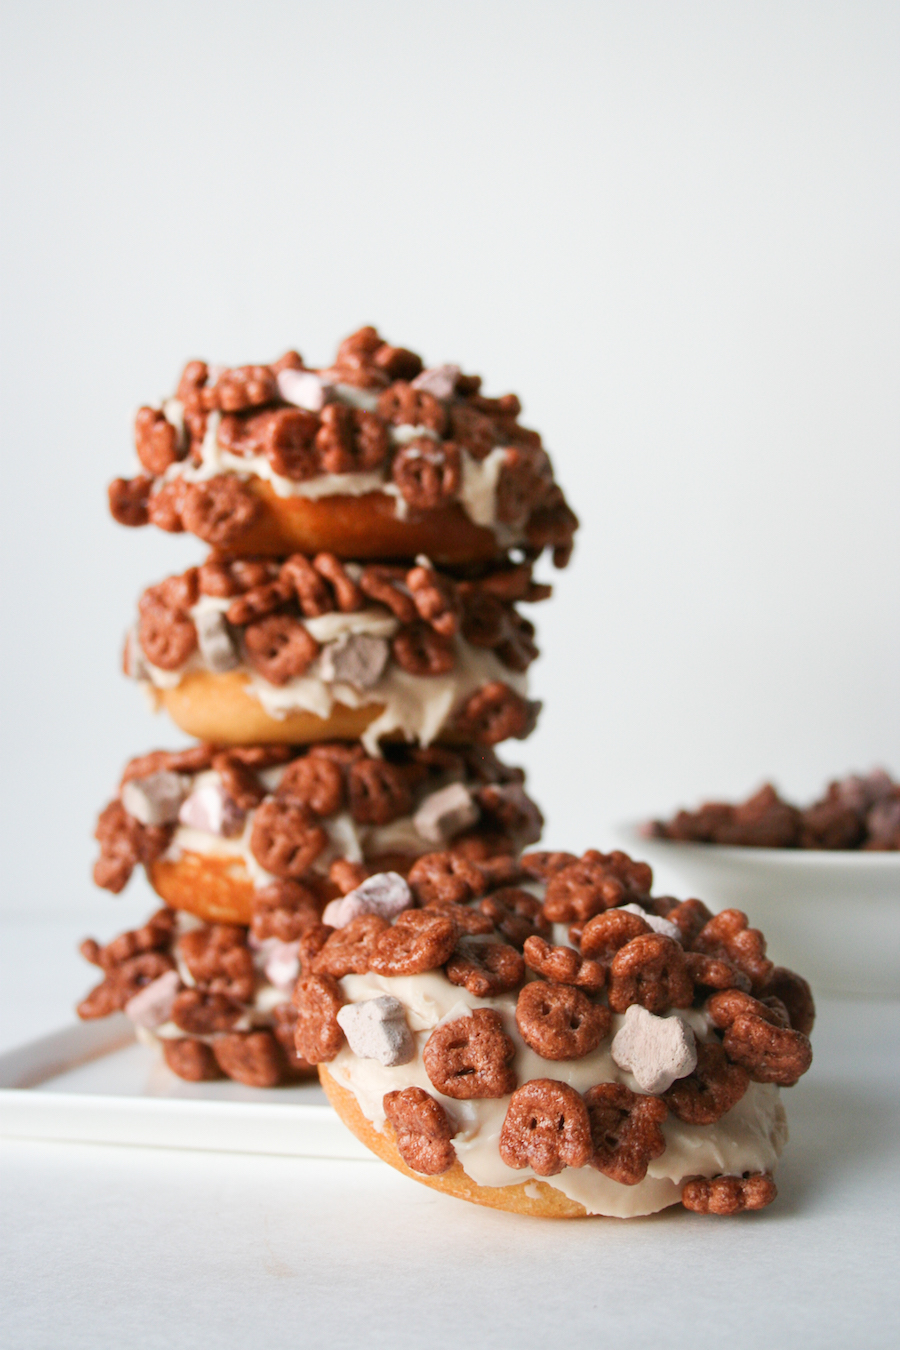 Count Chocula Cereal Milk Donuts // 13 Nights of Donuts // Legal Miss Sunshine